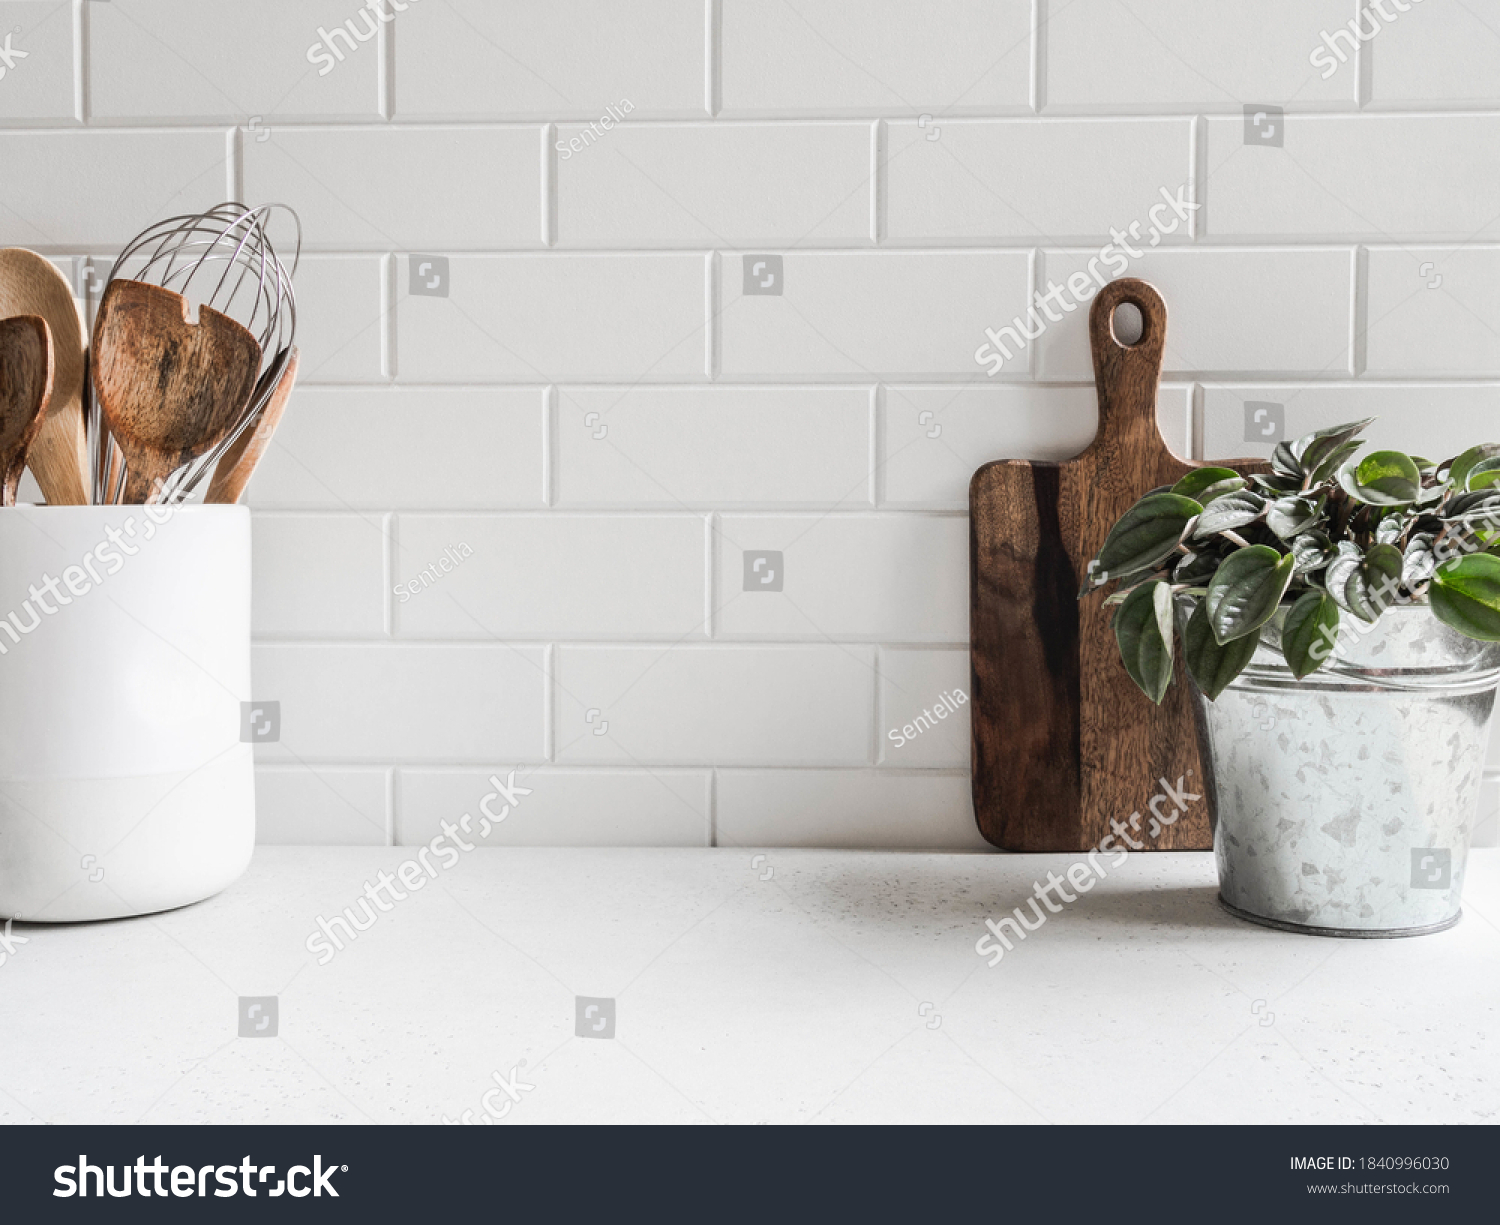 Stylish white kitchen background with kitchen utensils and green houseplant standing on white countertop, copy space for text, front view #1840996030